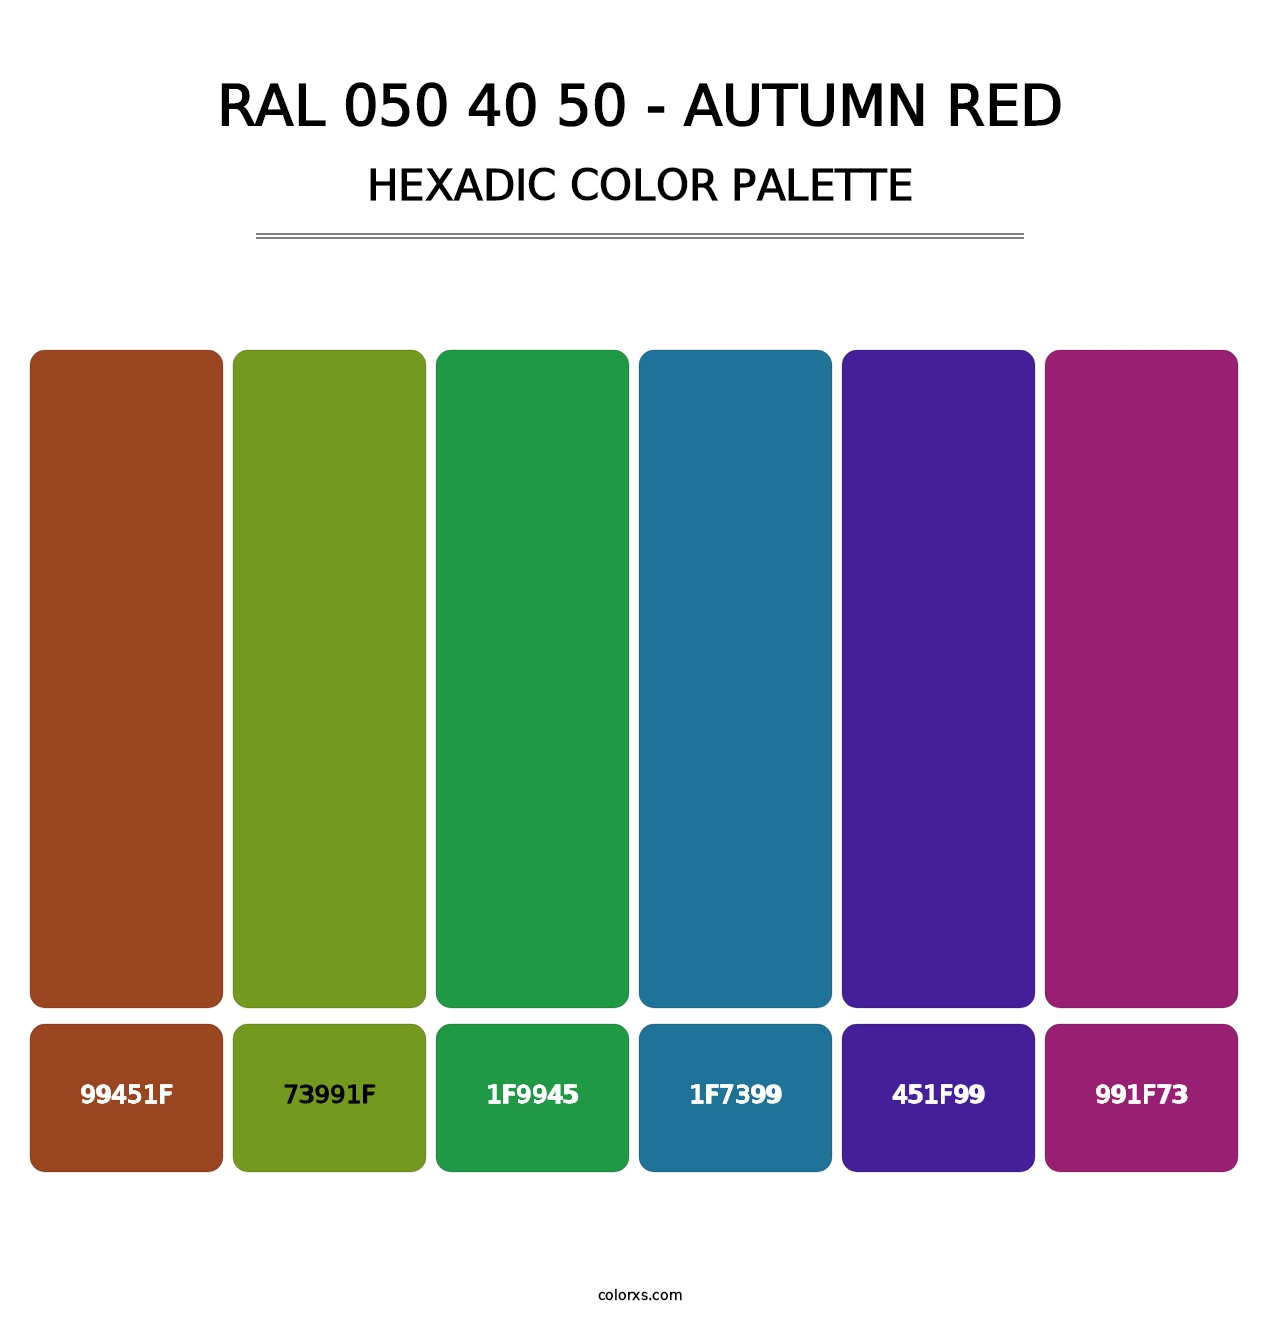 RAL 050 40 50 - Autumn Red - Hexadic Color Palette